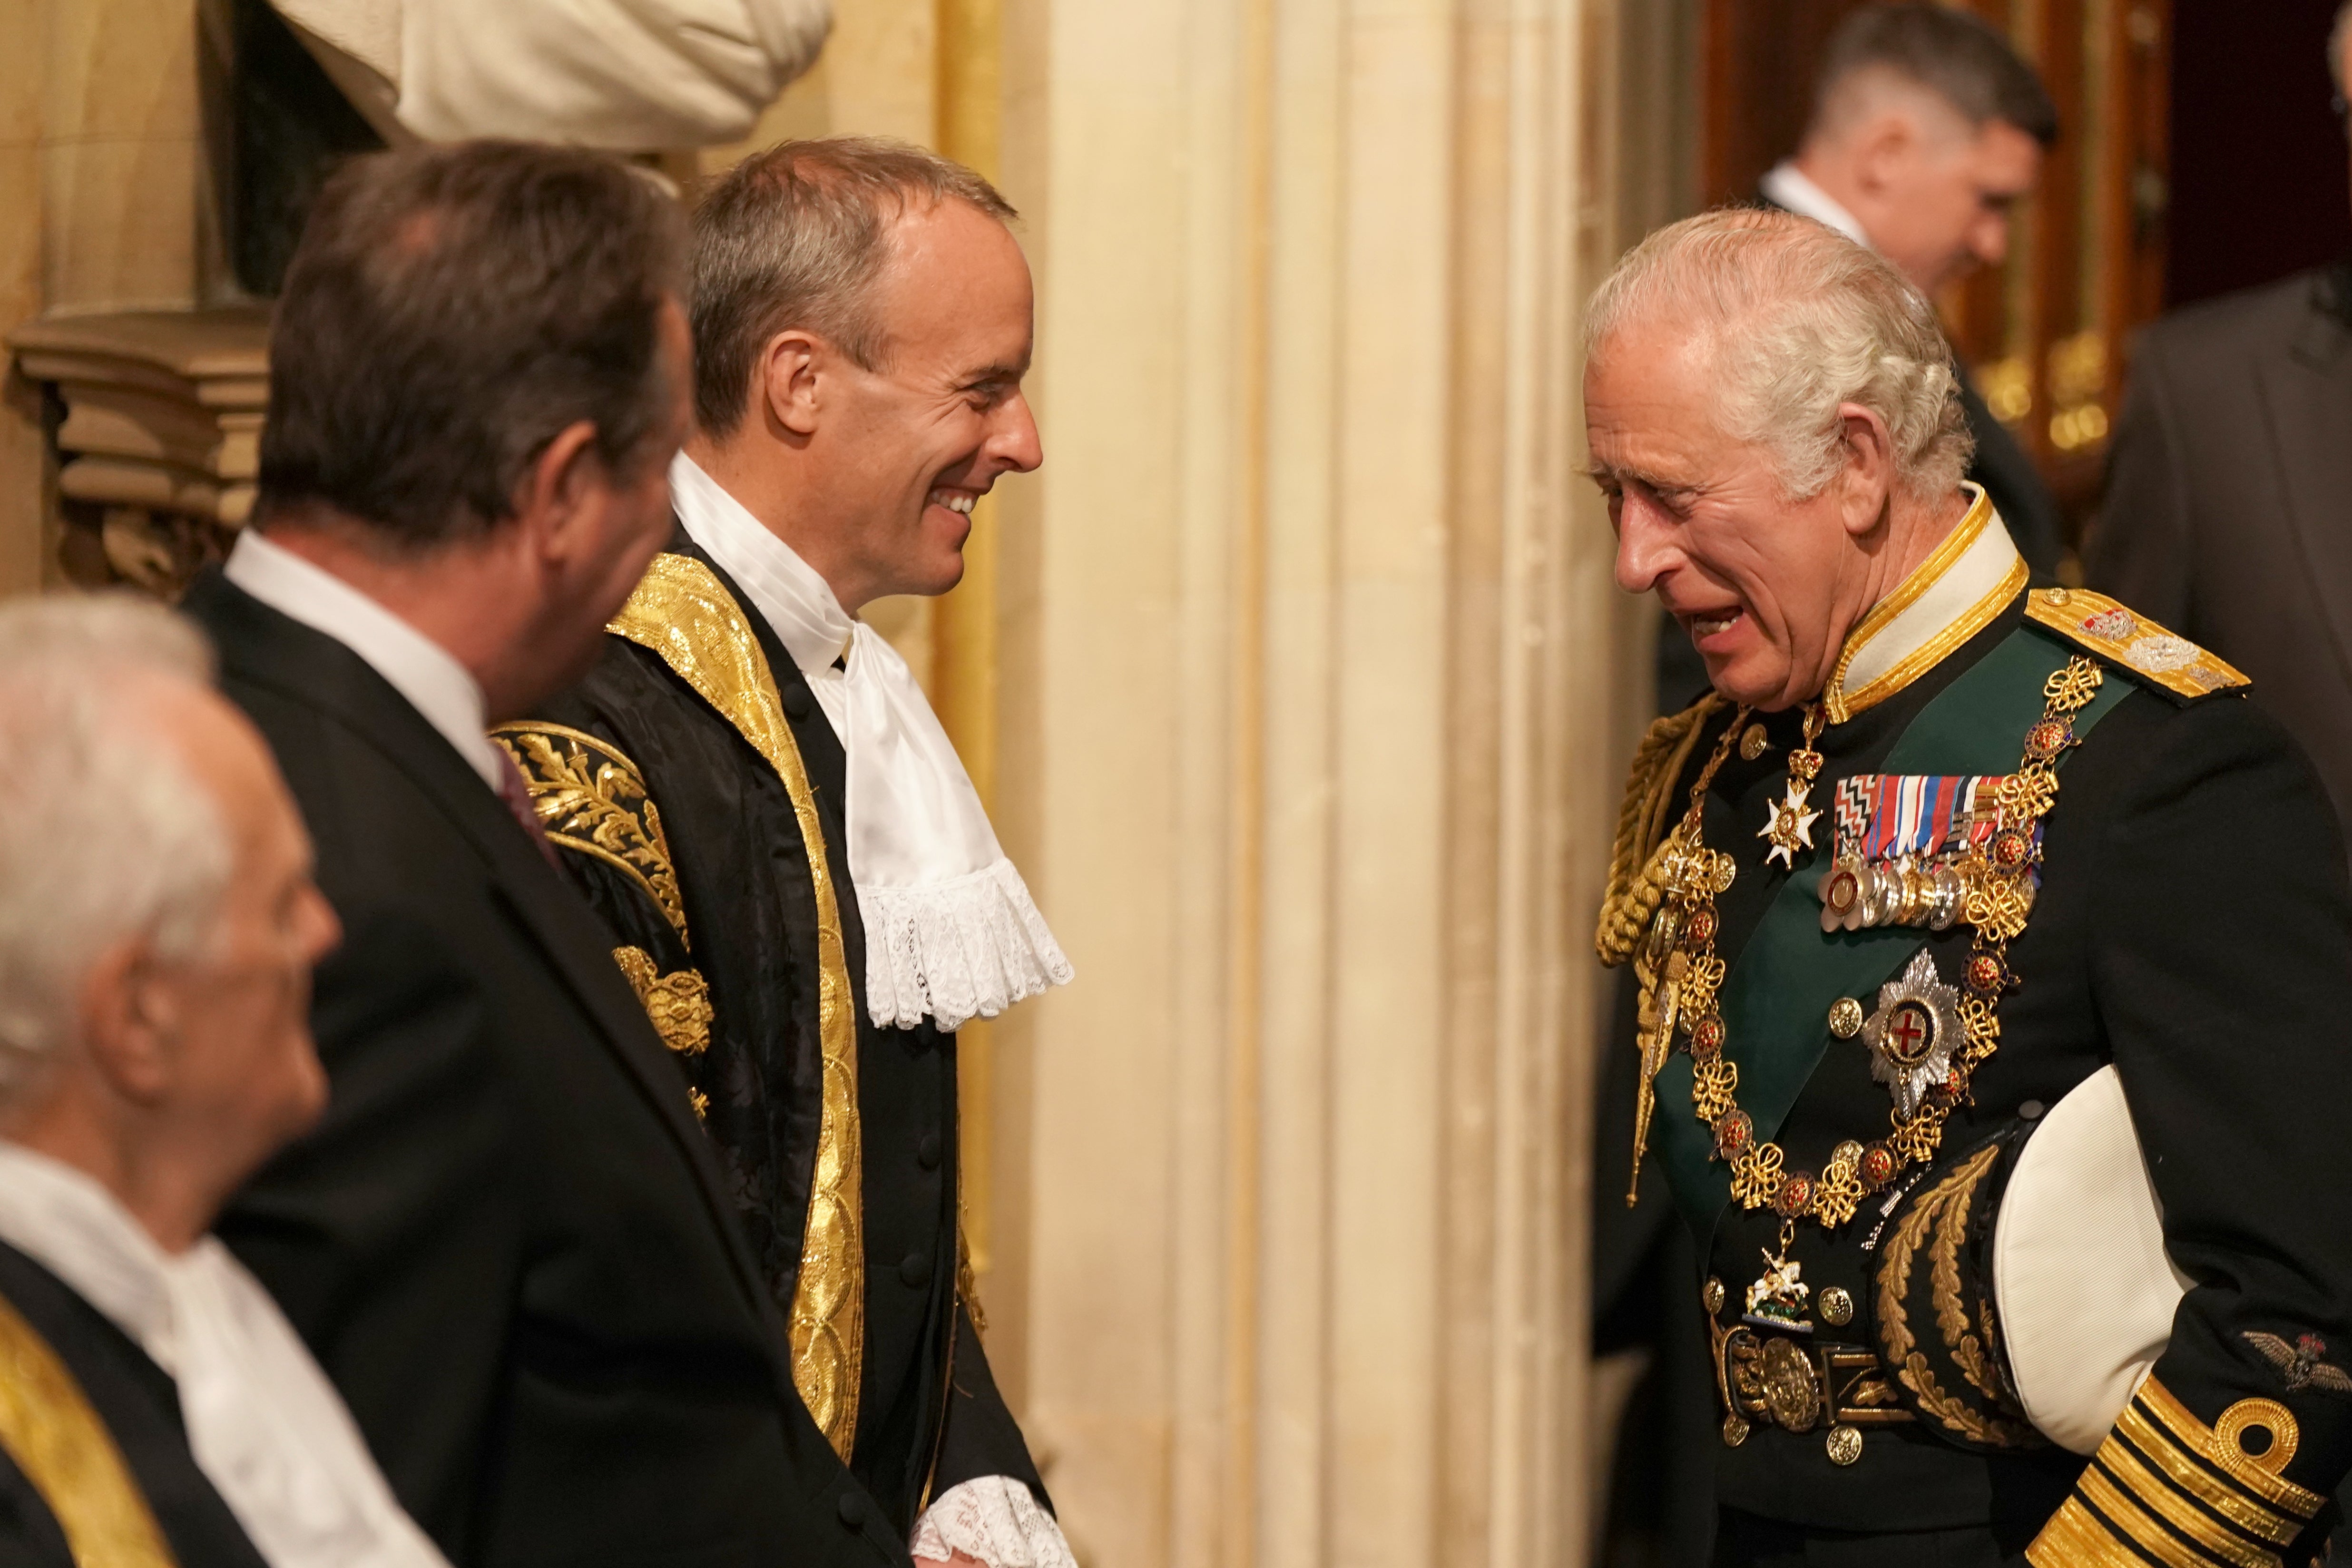 The Prince of Wales talks to Deputy Prime Minister Dominic Raab after attending the State Opening of Parliament (Aaron Chown/PA)